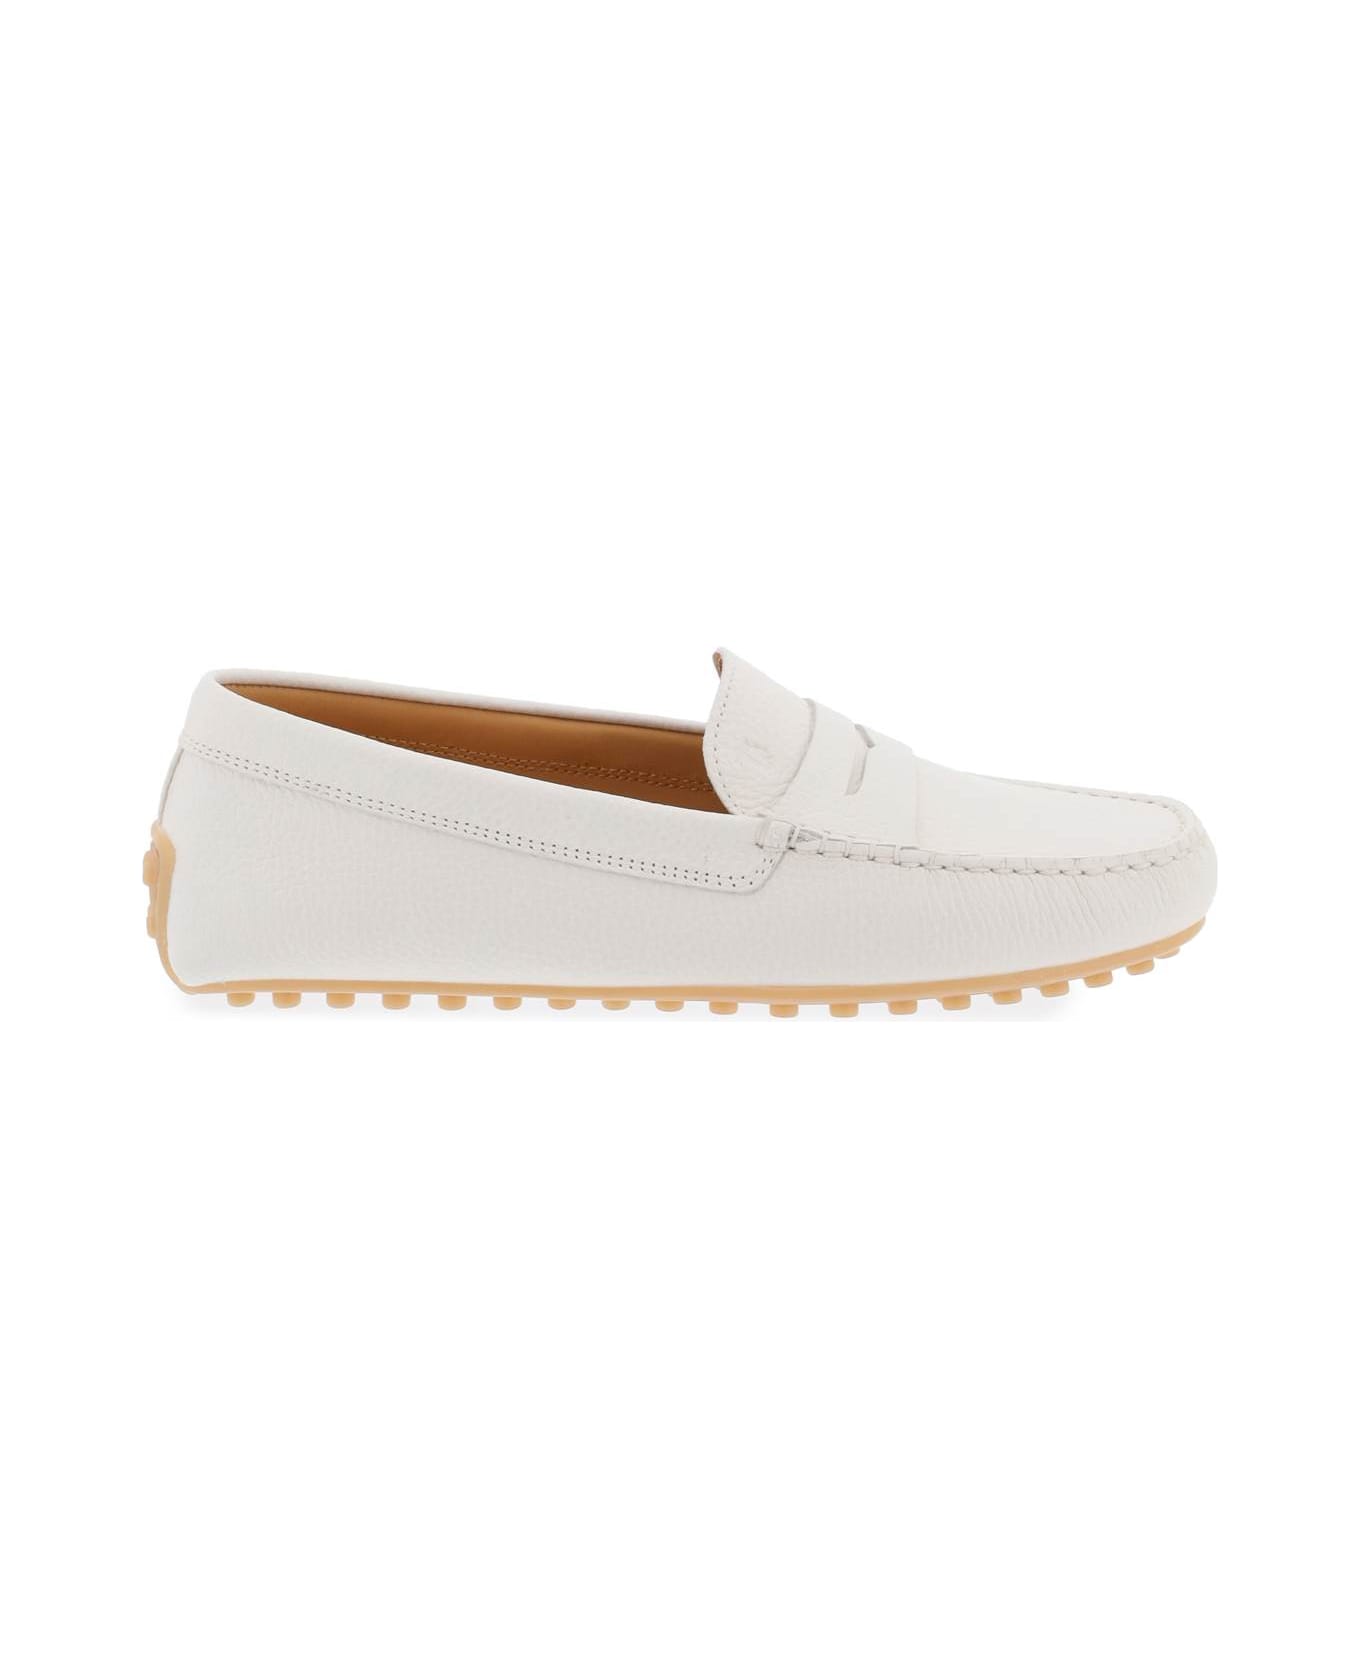 Tod's City Gommino Leather Loafers - MOUSSE (White) フラットシューズ